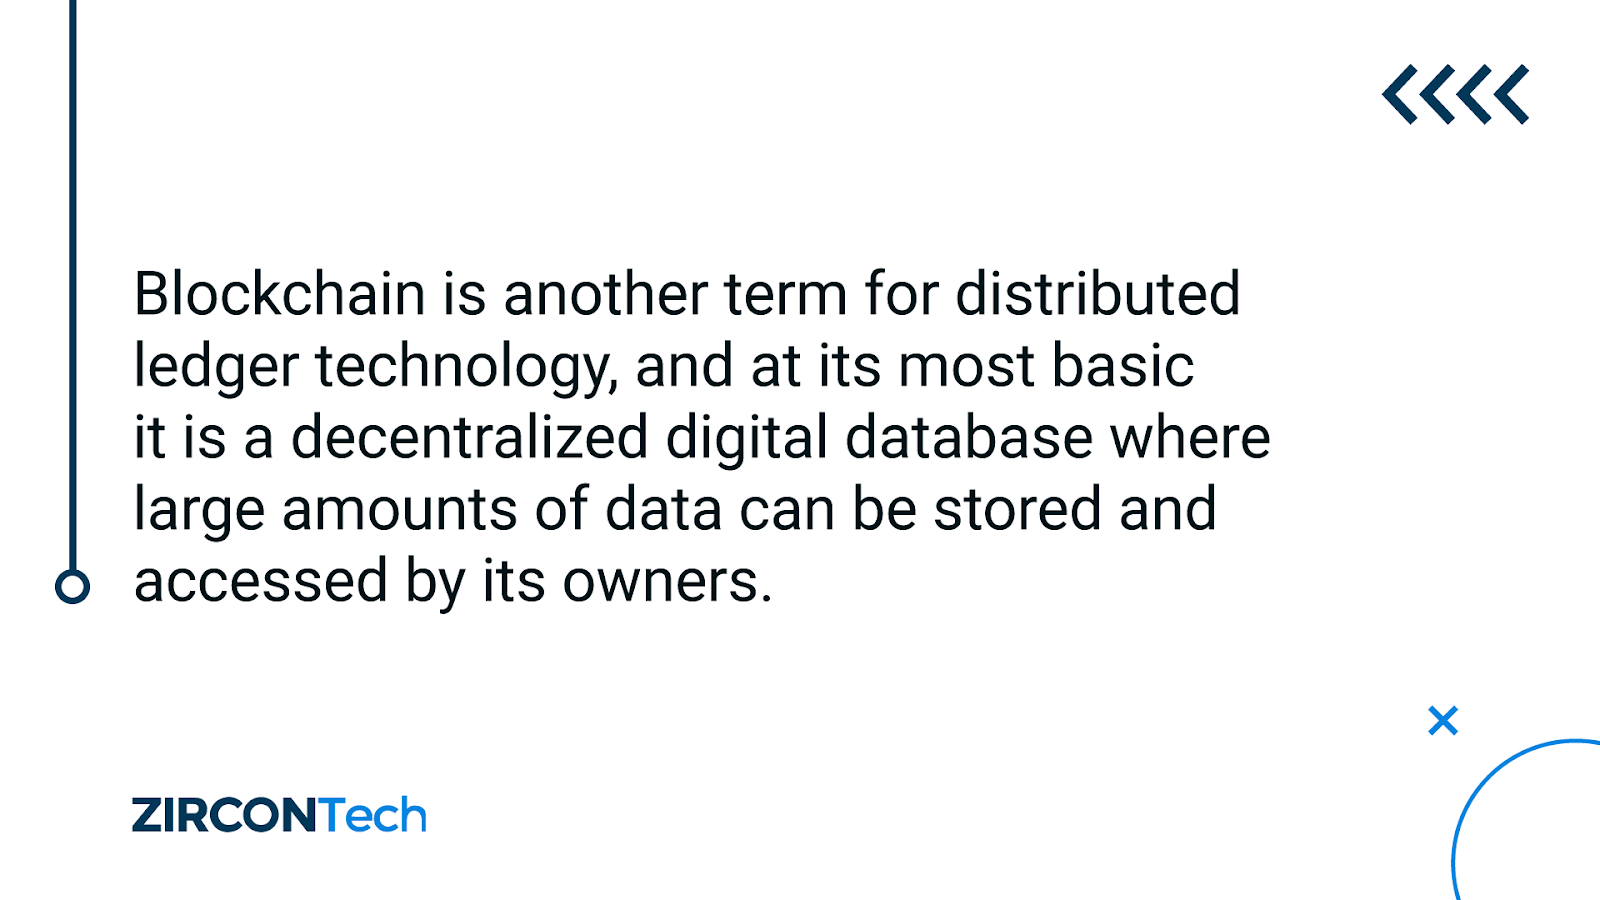 Blockchain is another term for distributed ledger technology and at its most basic it is a decentralized digital database where large amounts of date can de stored and accessed by its owners